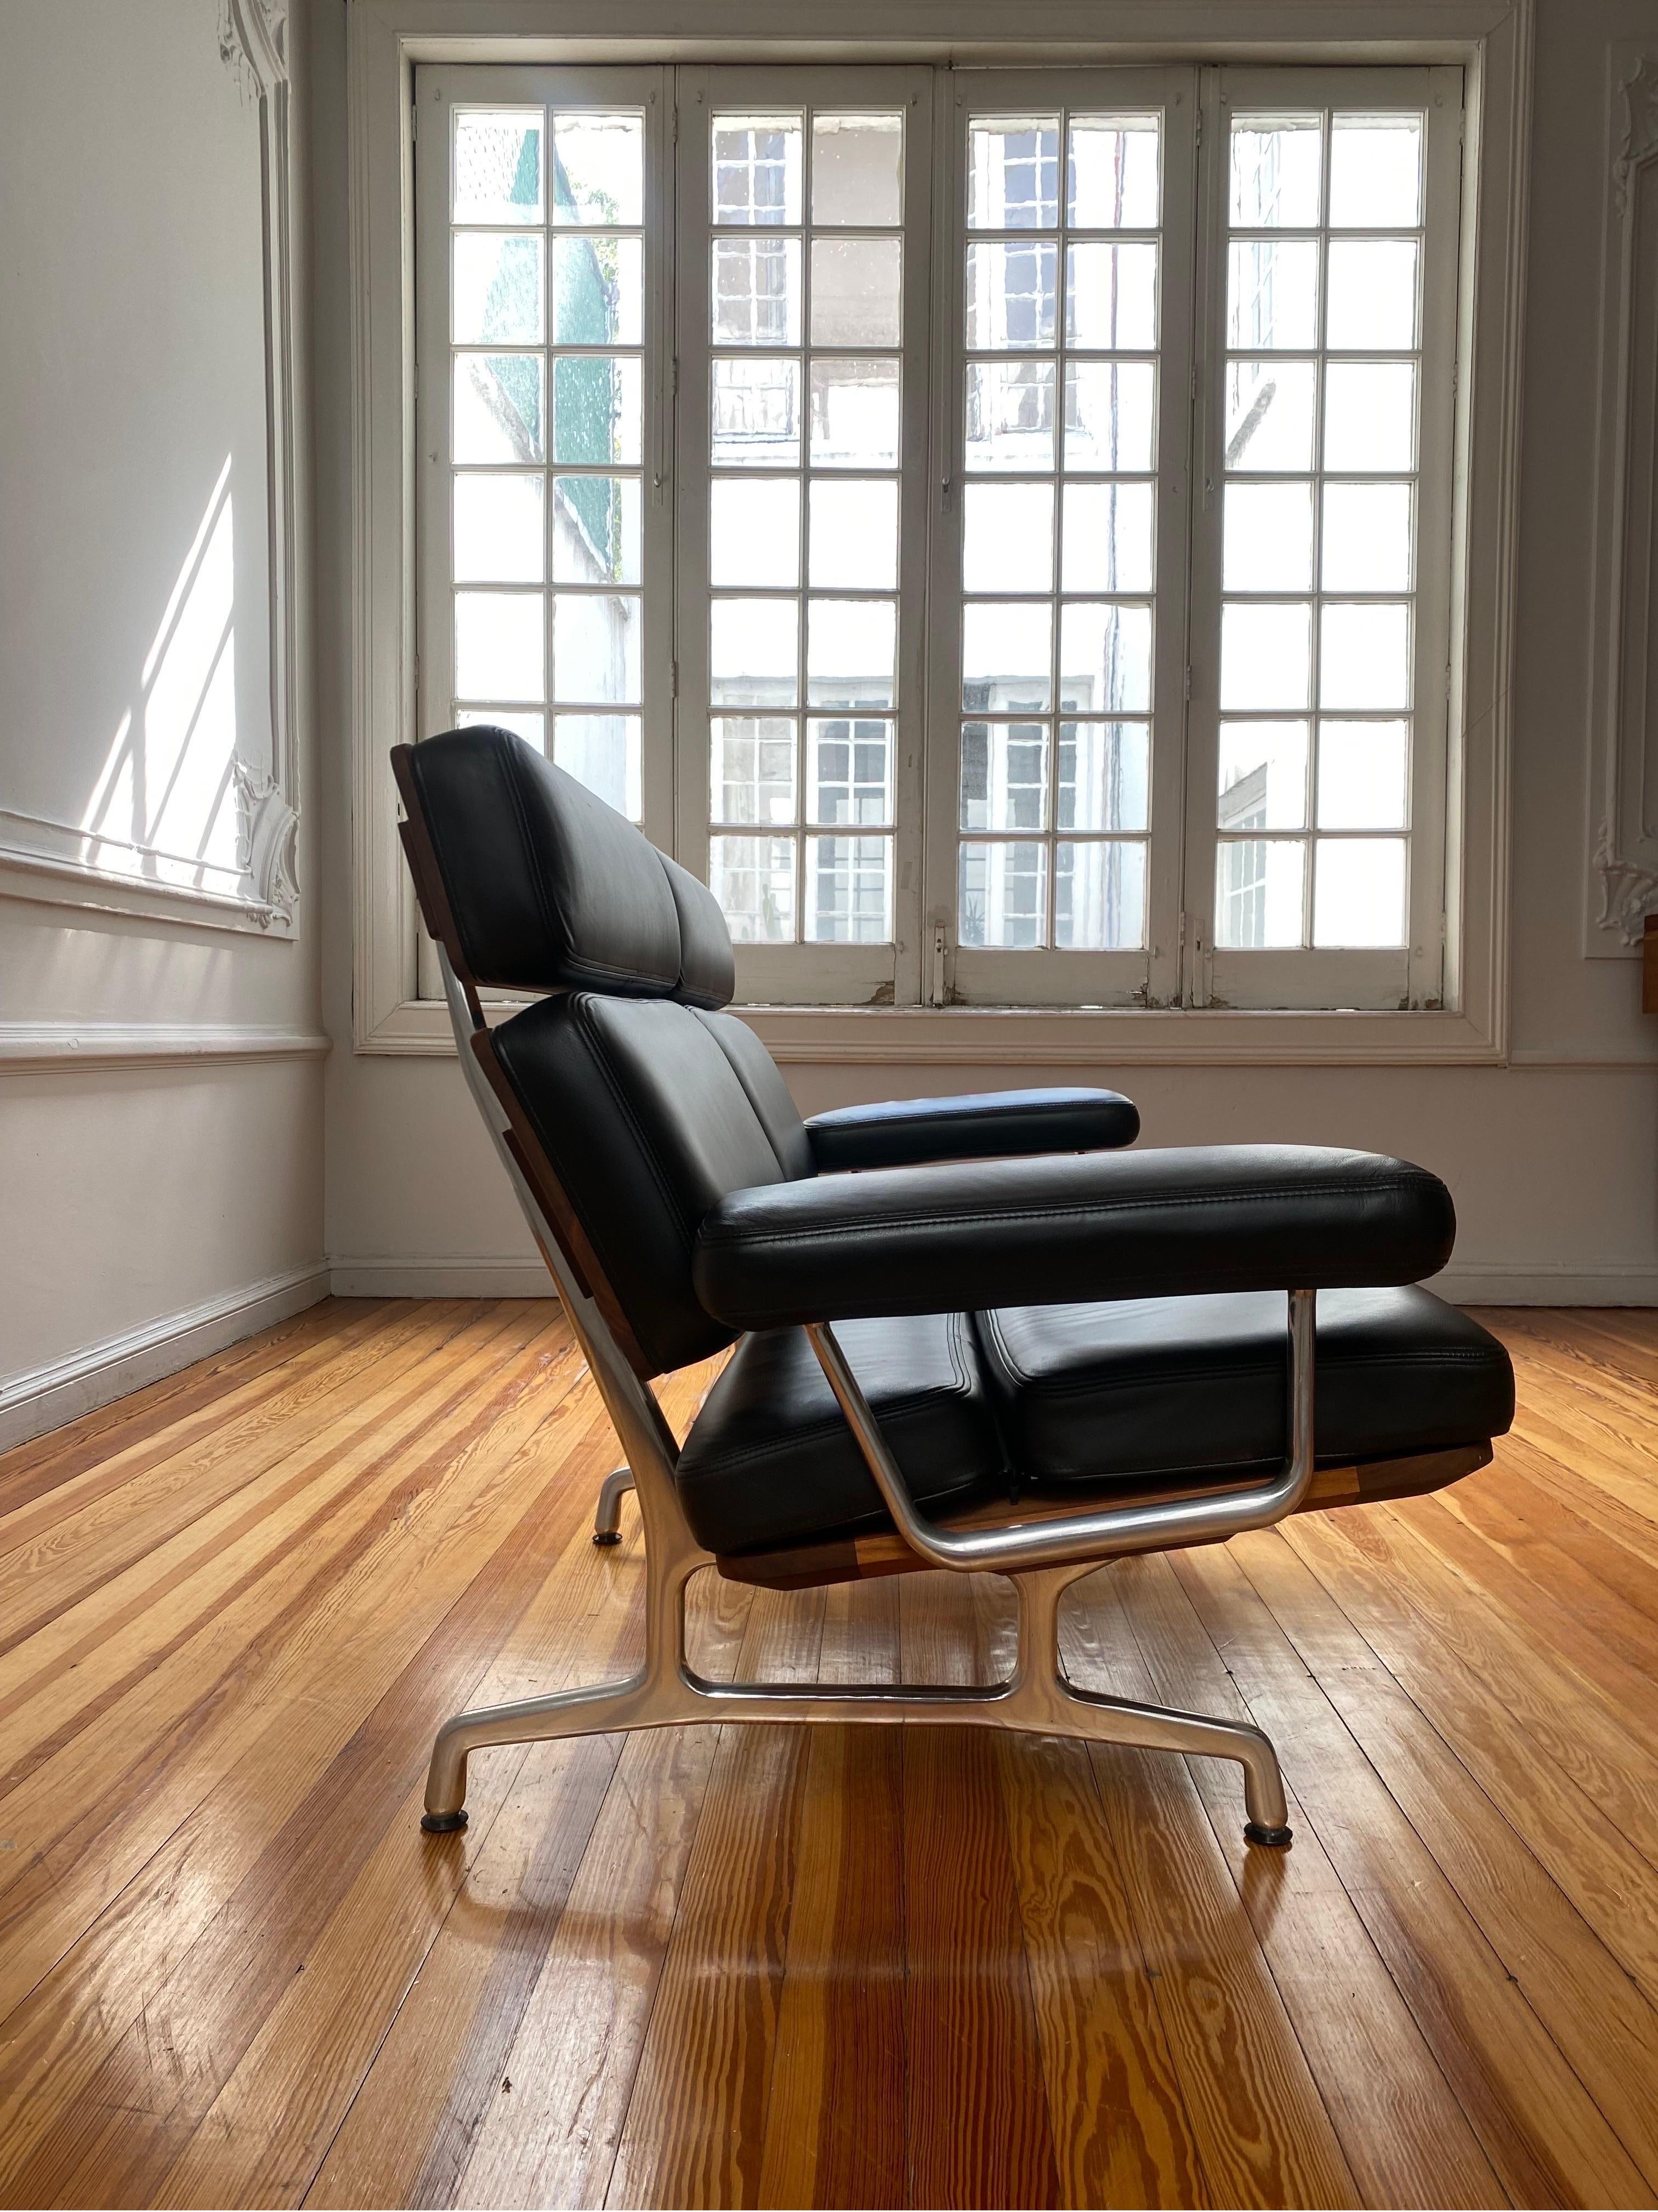 American Eames Sofa Produced by Herman Miller in Black Leather, Walnut and Aluminum For Sale